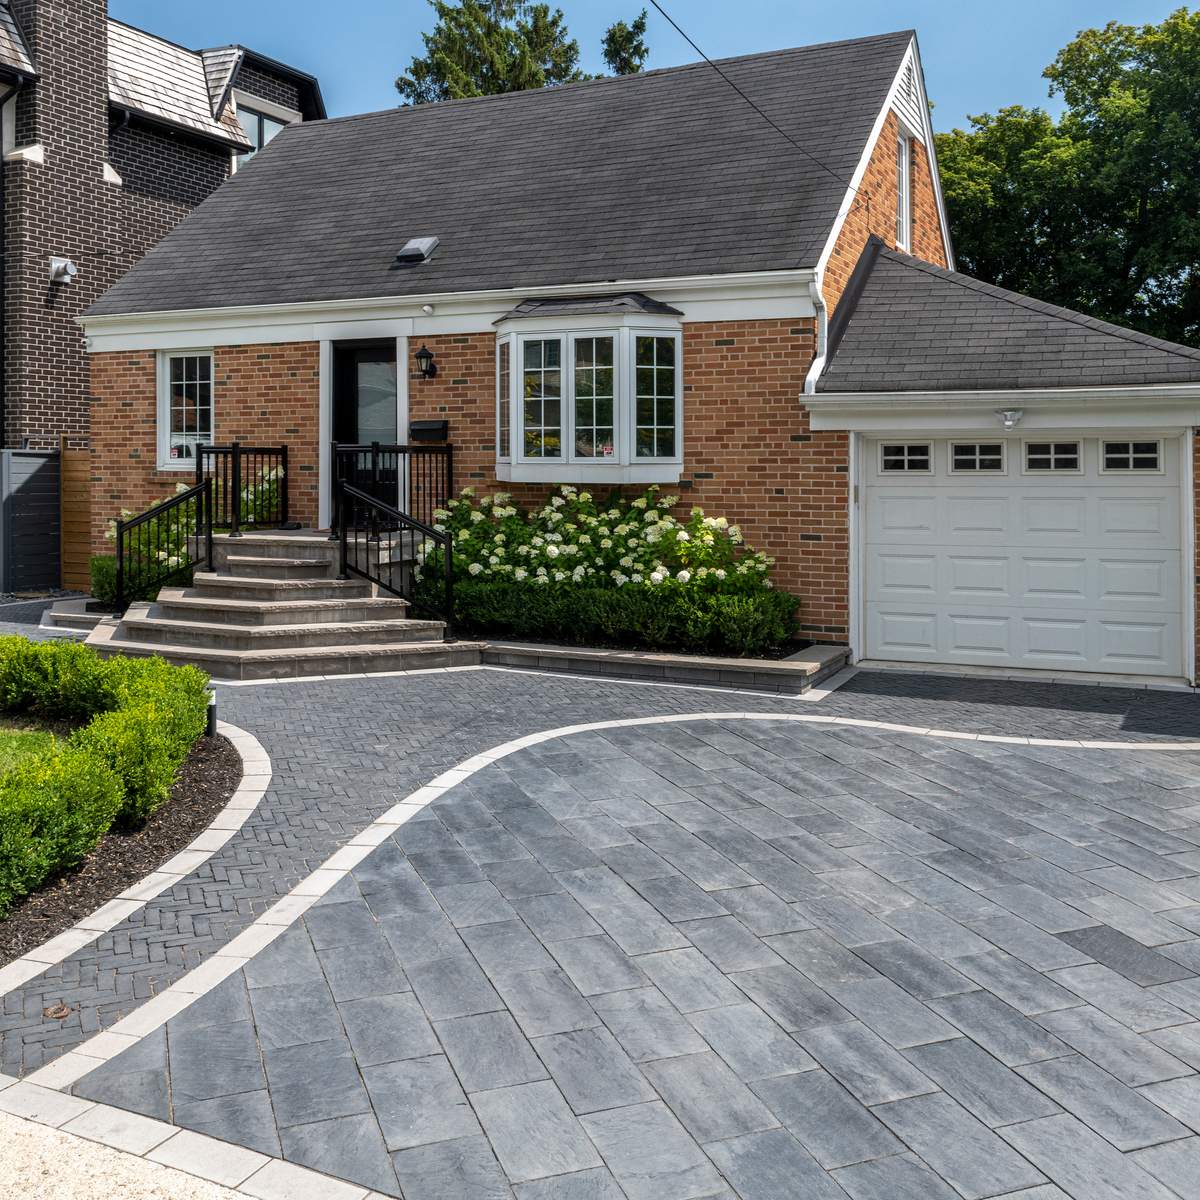 Sweeping interlocking walkway blends with driveway pavers in front of home